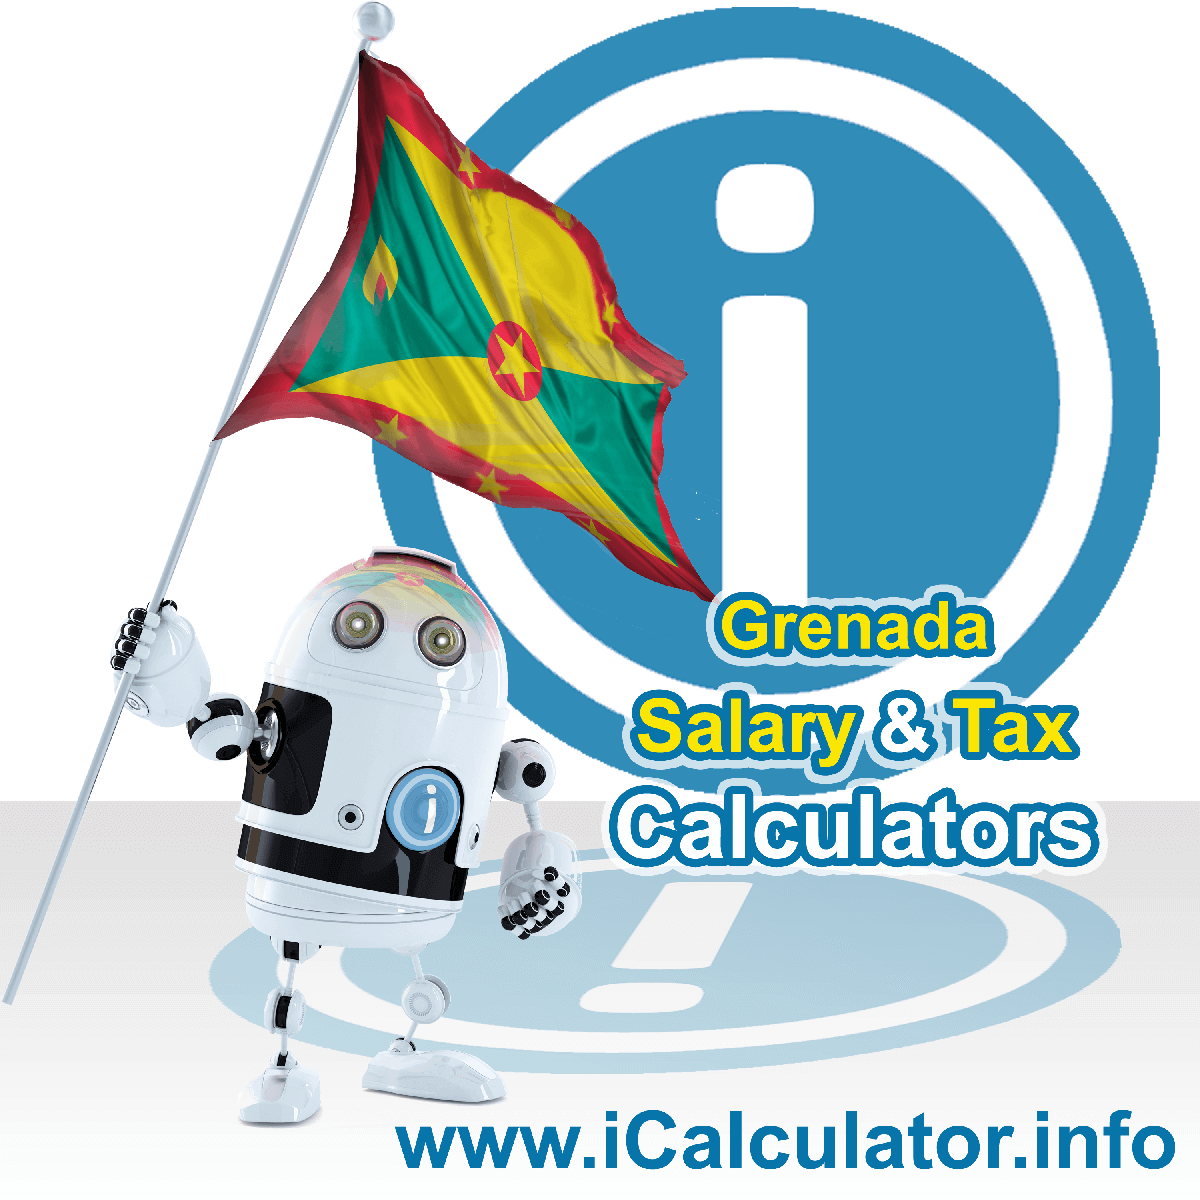 Grenada Tax Calculator. This image shows the Grenada flag and information relating to the tax formula for the Grenada Salary Calculator